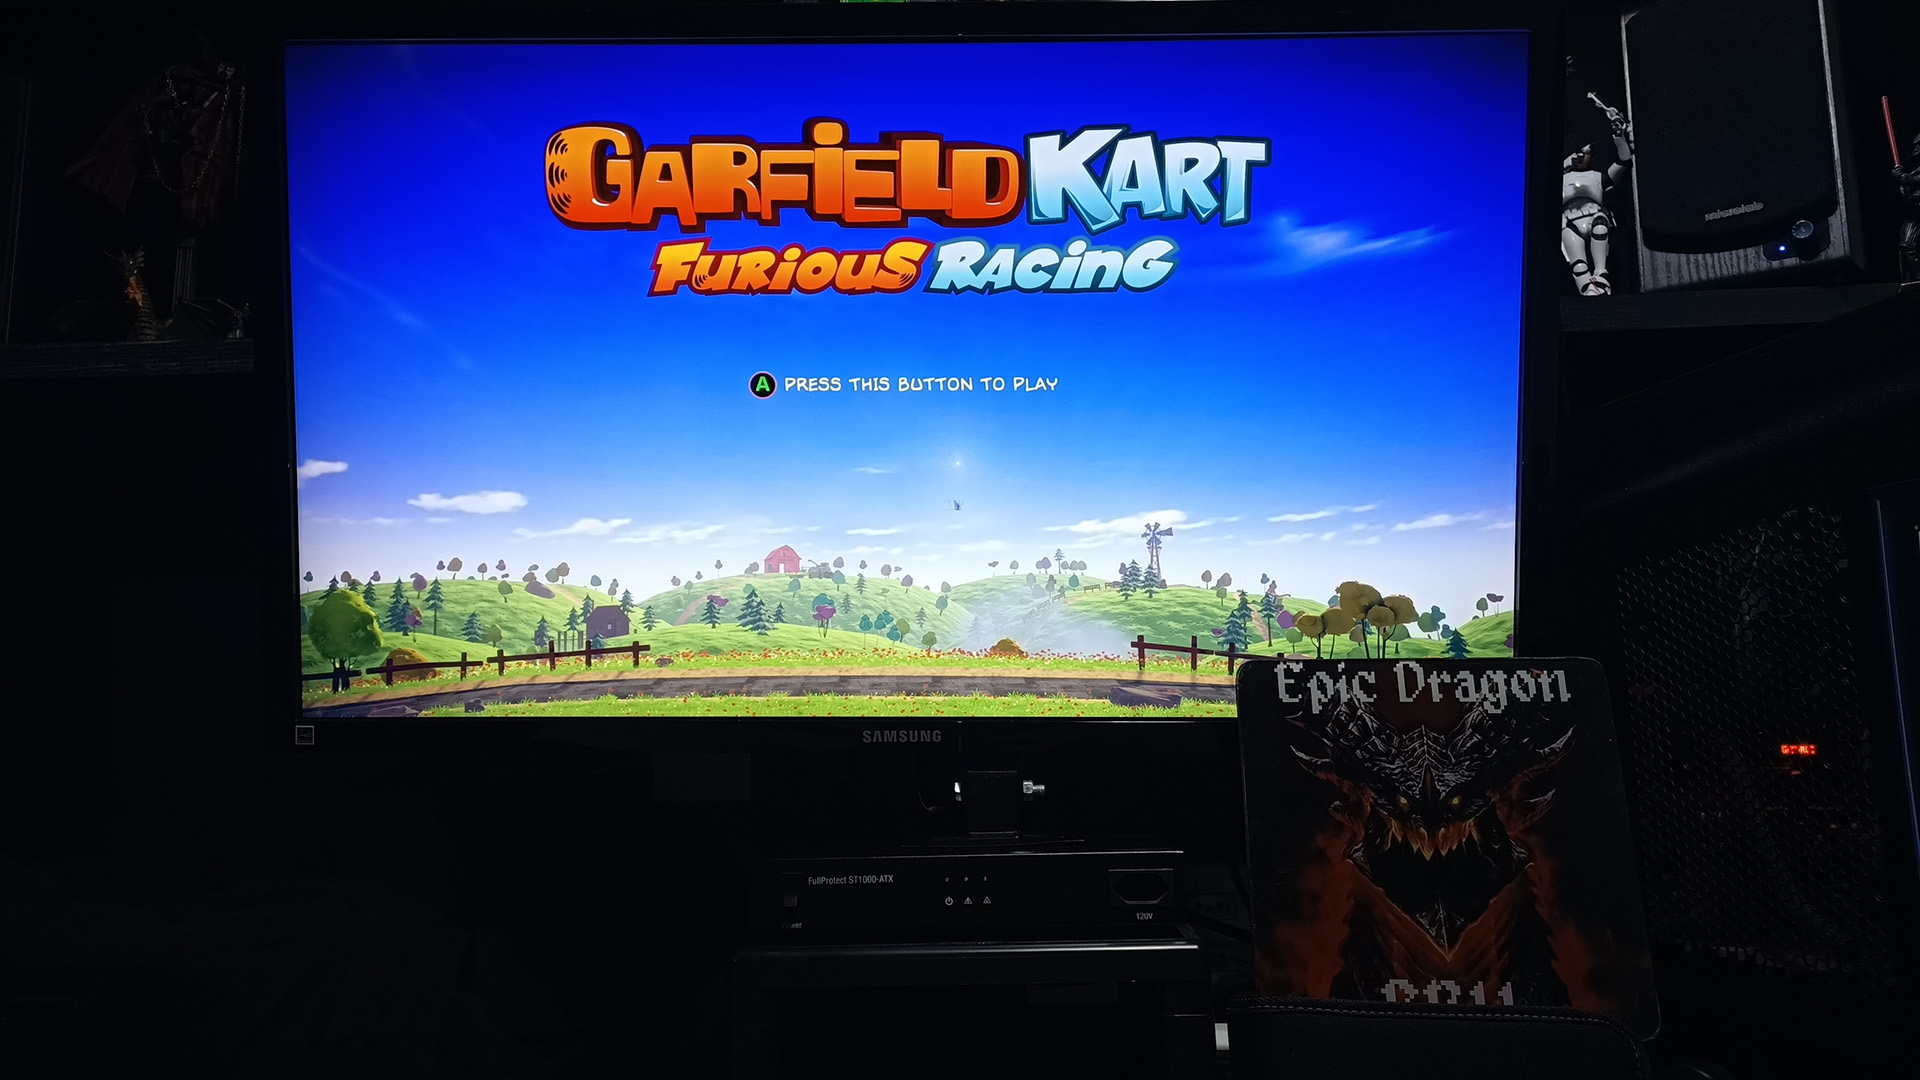 EpicDragon: Garfield Kart Furious Racing: Spooky Manor [Time Trial: 3 Laps] (PC) 0:02:17.42 points on 2022-08-14 15:02:05